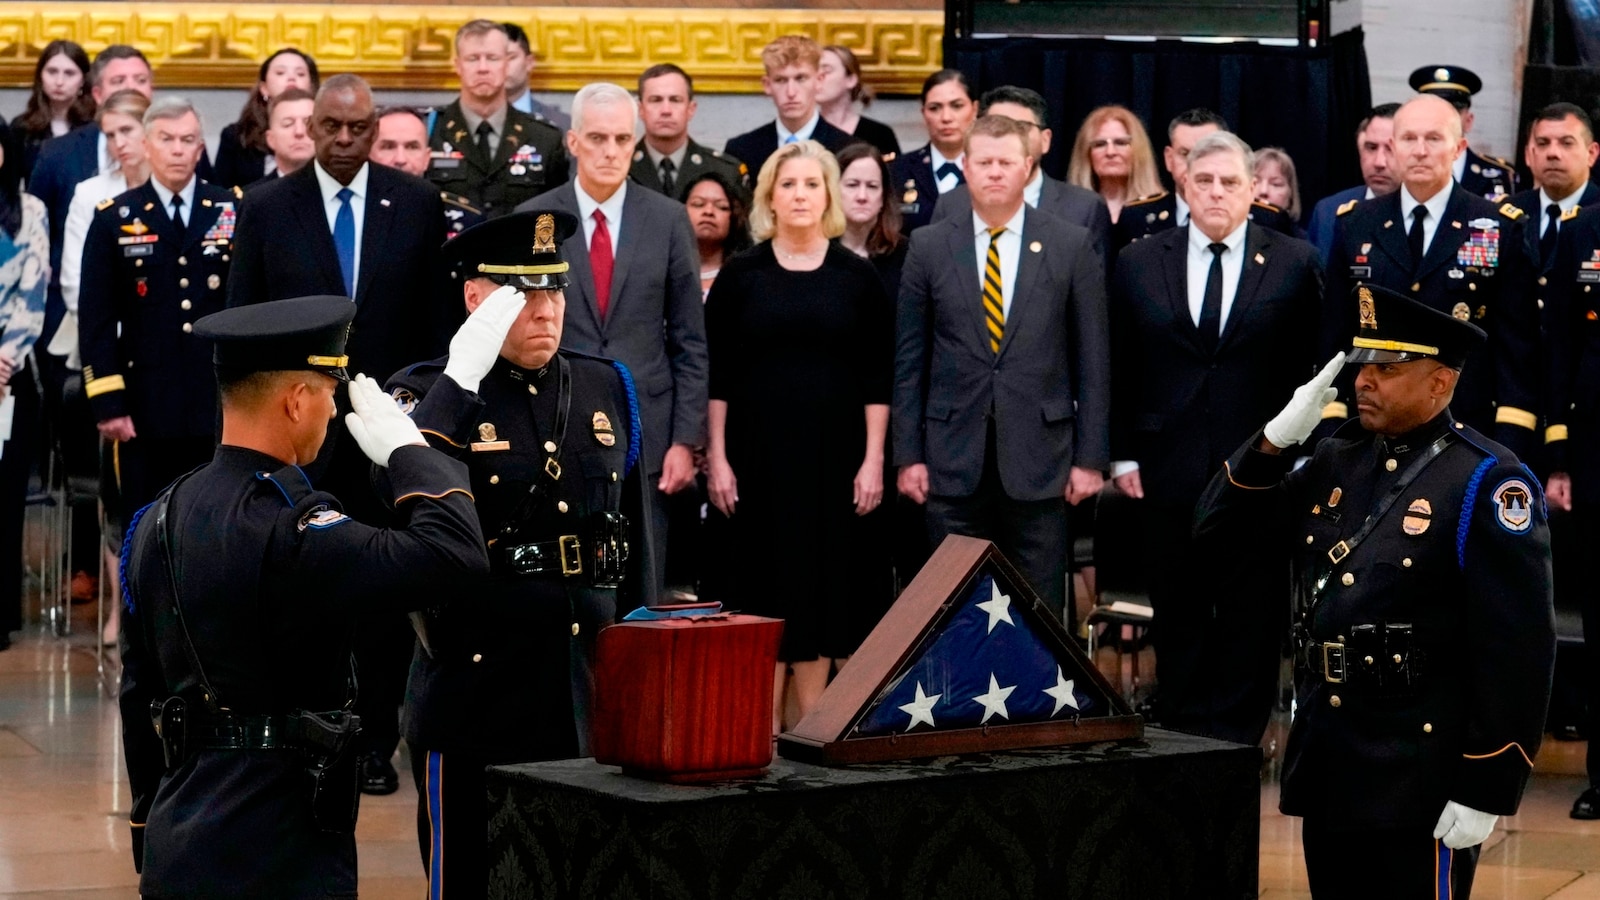 Medal of Honor recipient Col. Ralph Puckett lies in honor in Capitol rotunda [Video]